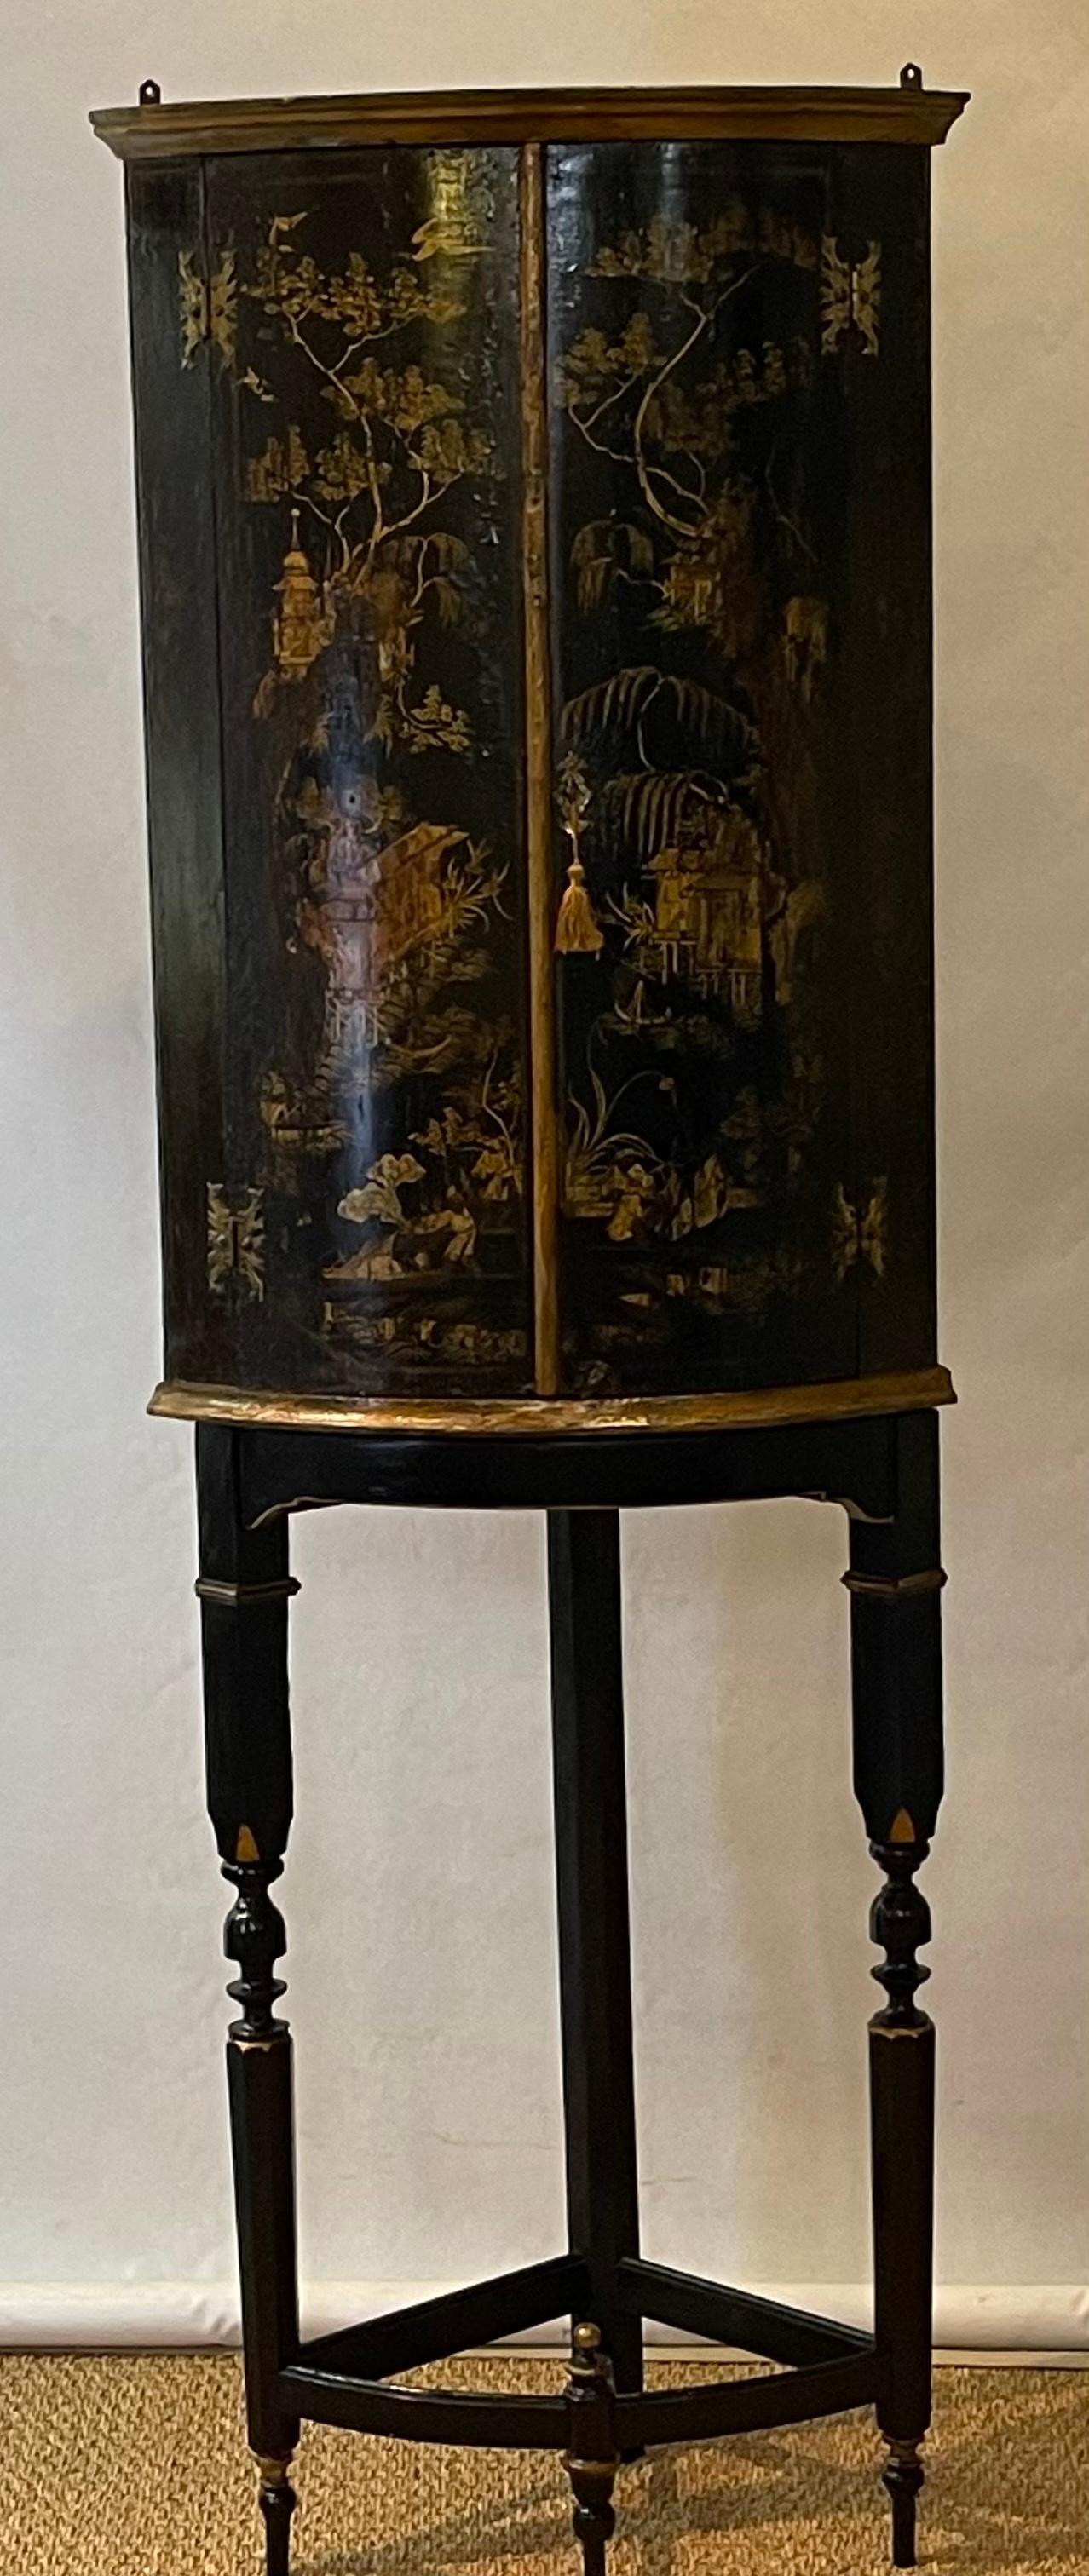 Hand-Painted 18th Century English Chinoiserie Decorated Corner Cabinet